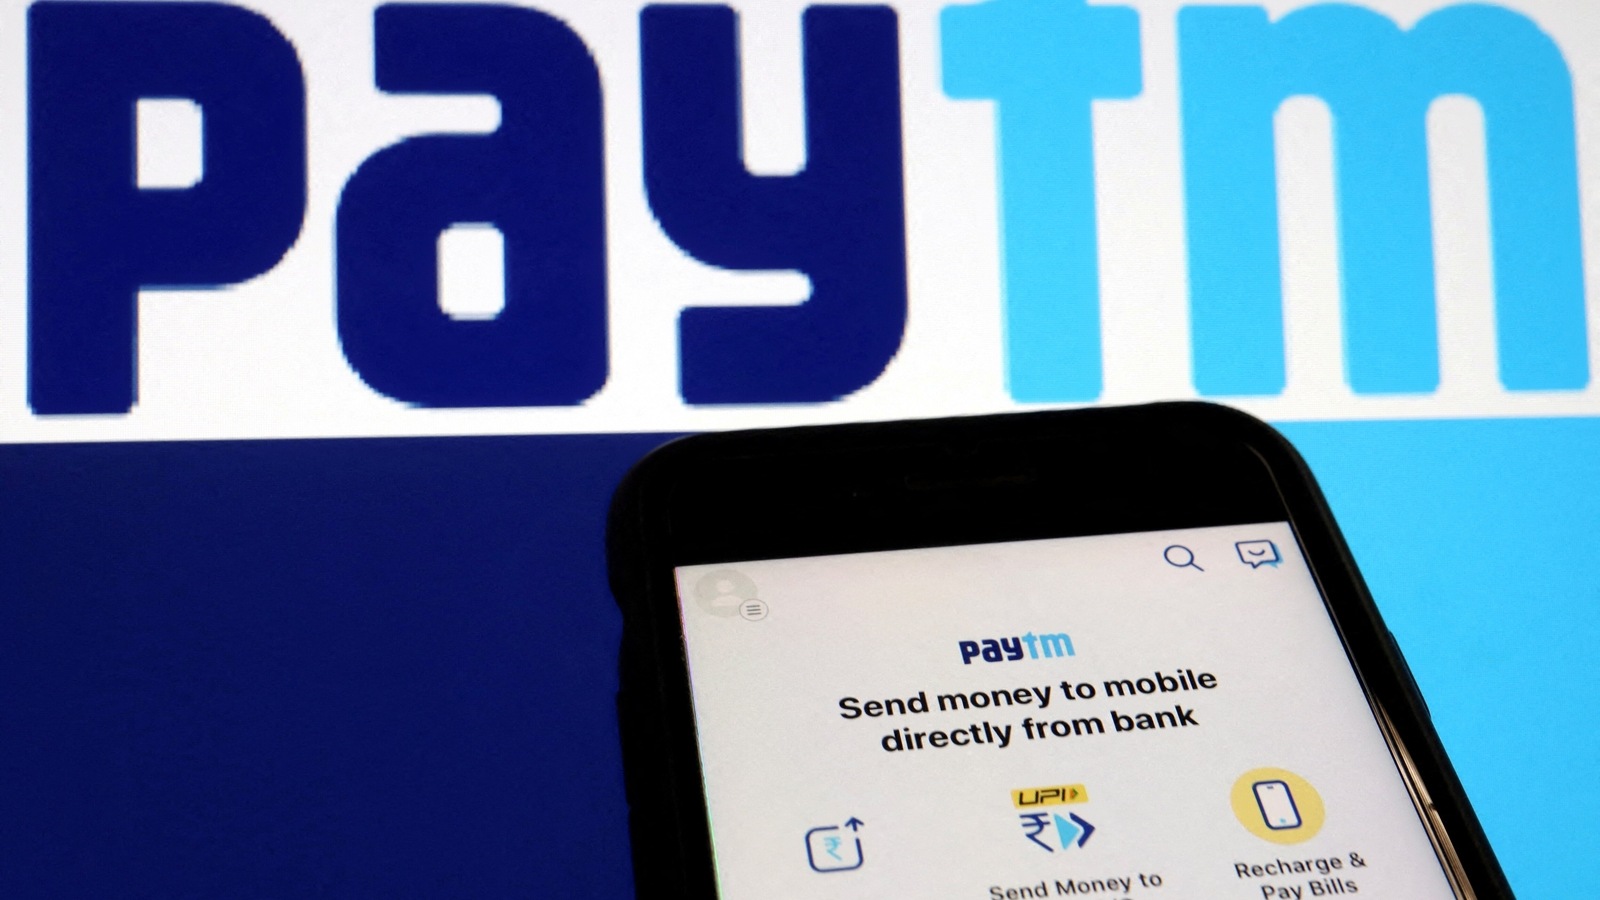 Paytm Sbi Card And Npci To Launch Co Branded Rupay Credit Cards To Drive Credit Inclusion 3345